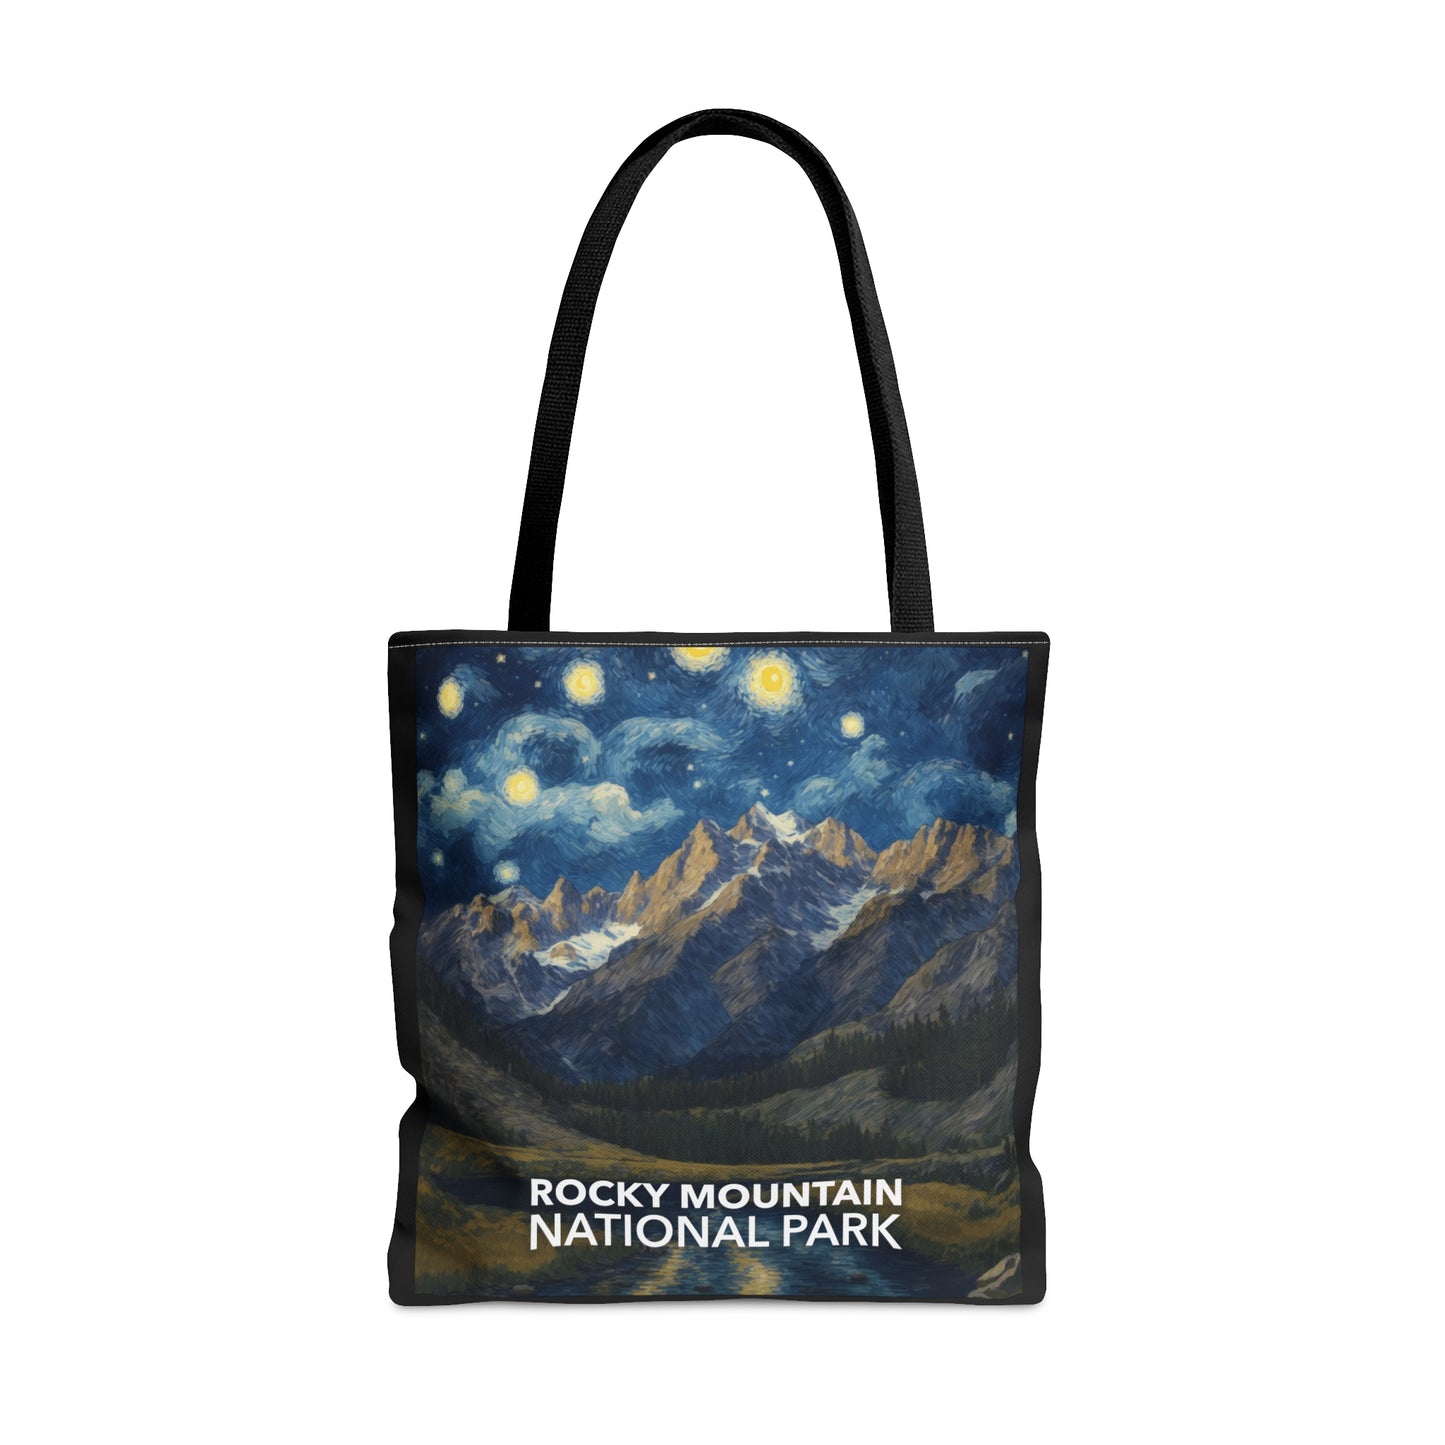 Rocky Mountain National Park Tote Bag - The Starry Night